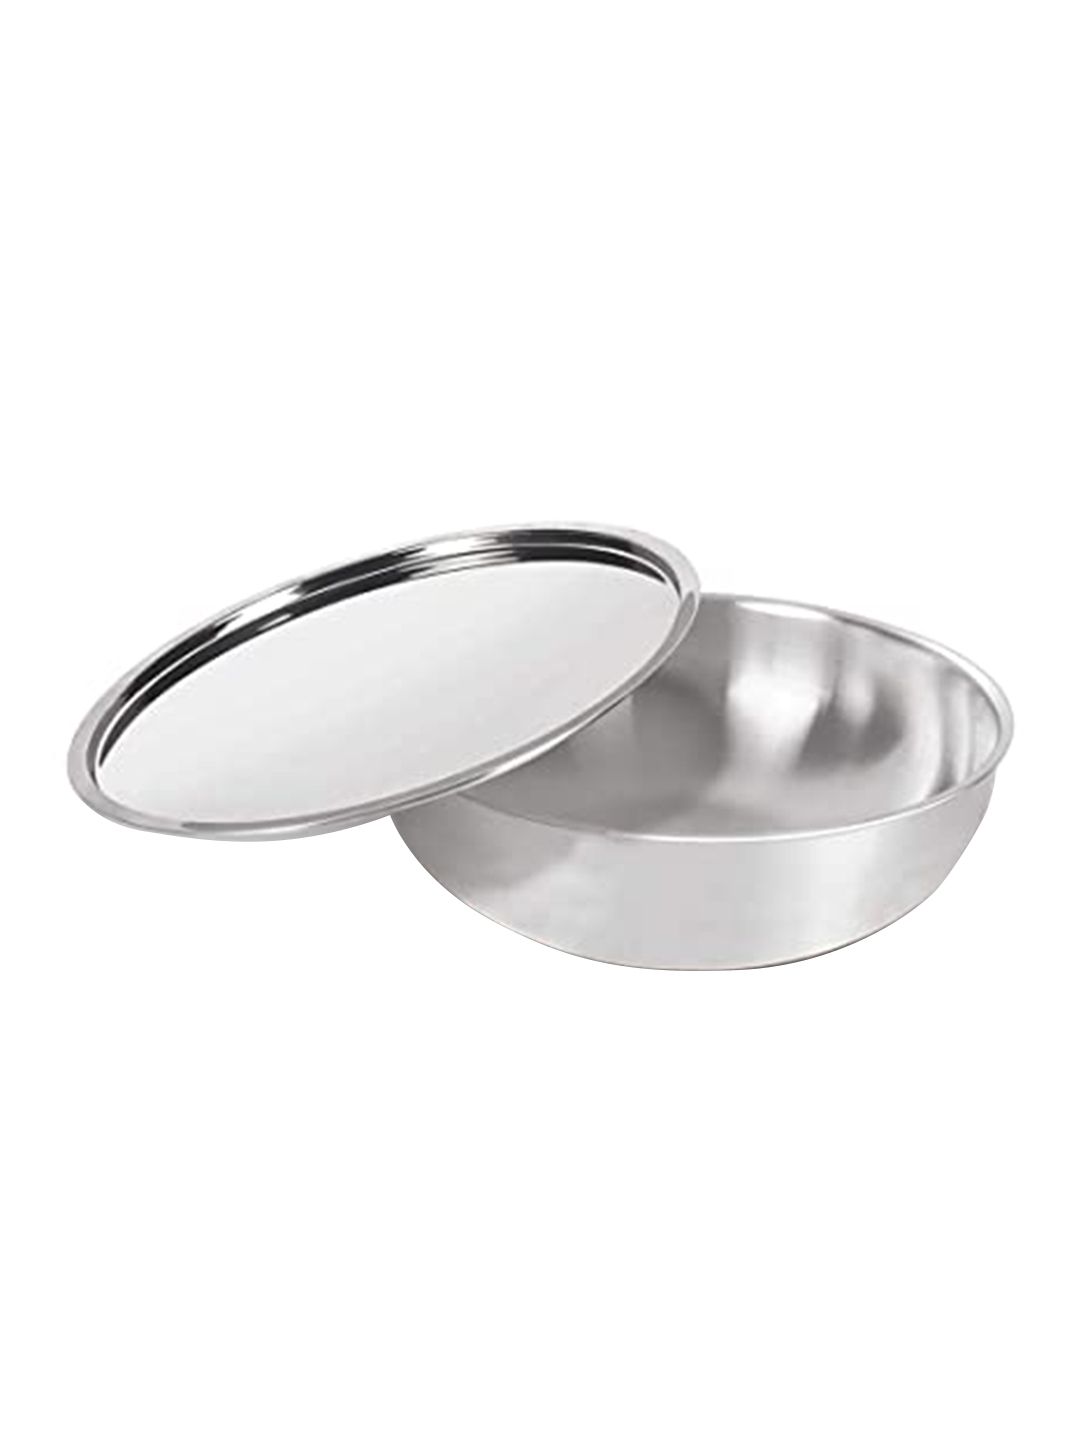 Femora Stainless Steel Tri-ply Kadhai Without Handle with Lid Price in India